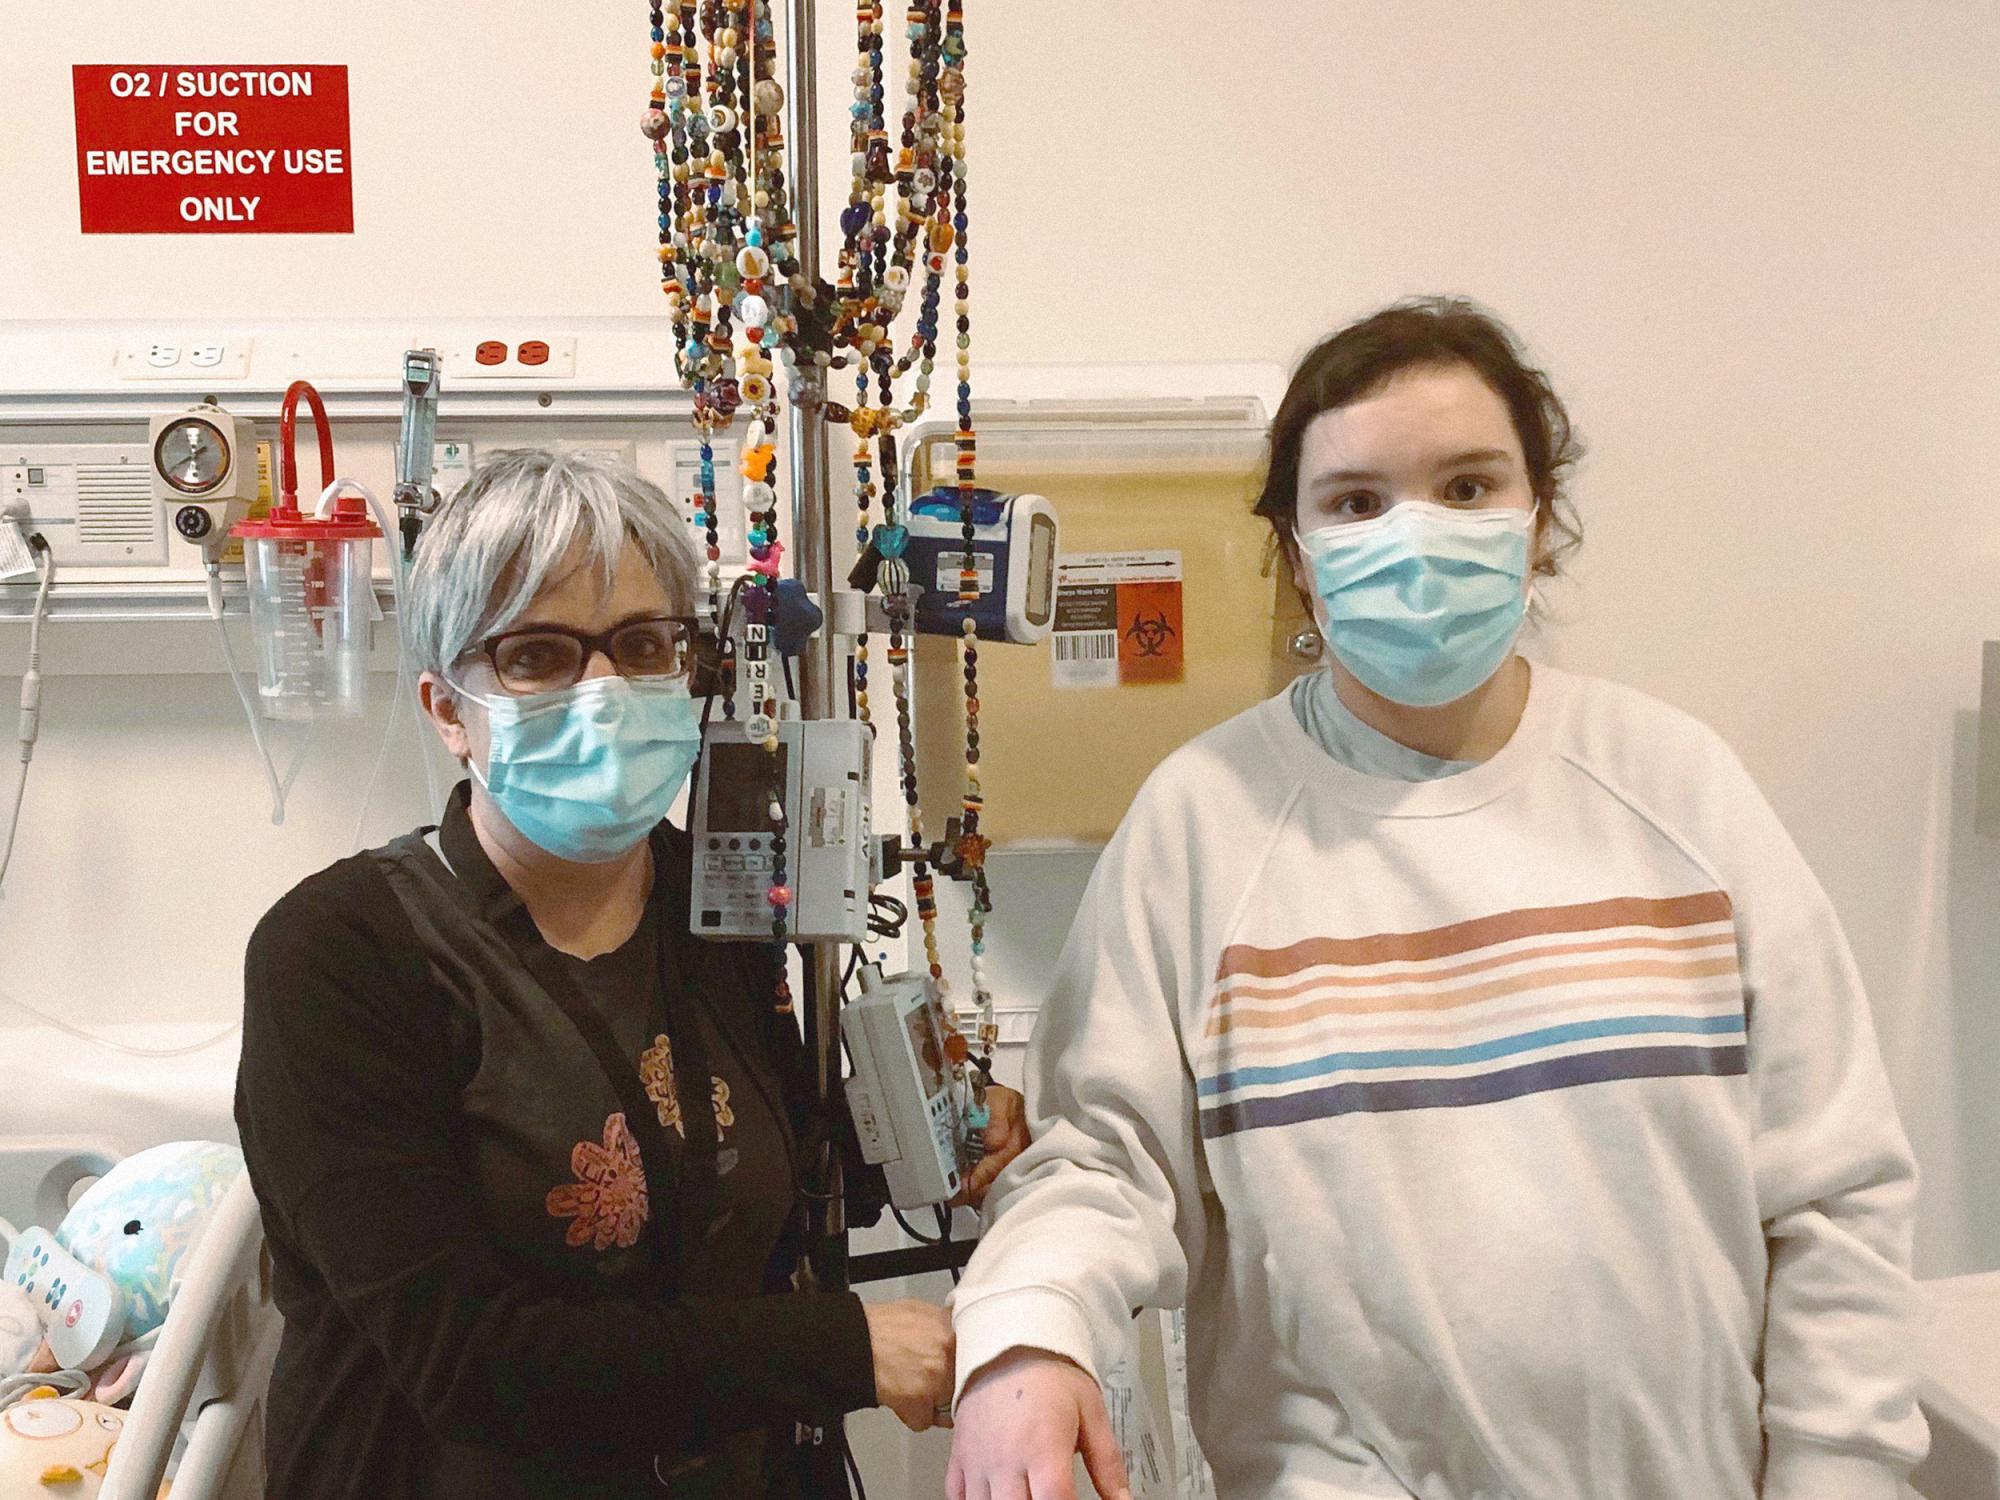 A woman and a teenaged girl wear surgical masks and pose in front of a intravenous stand in a hospital room.